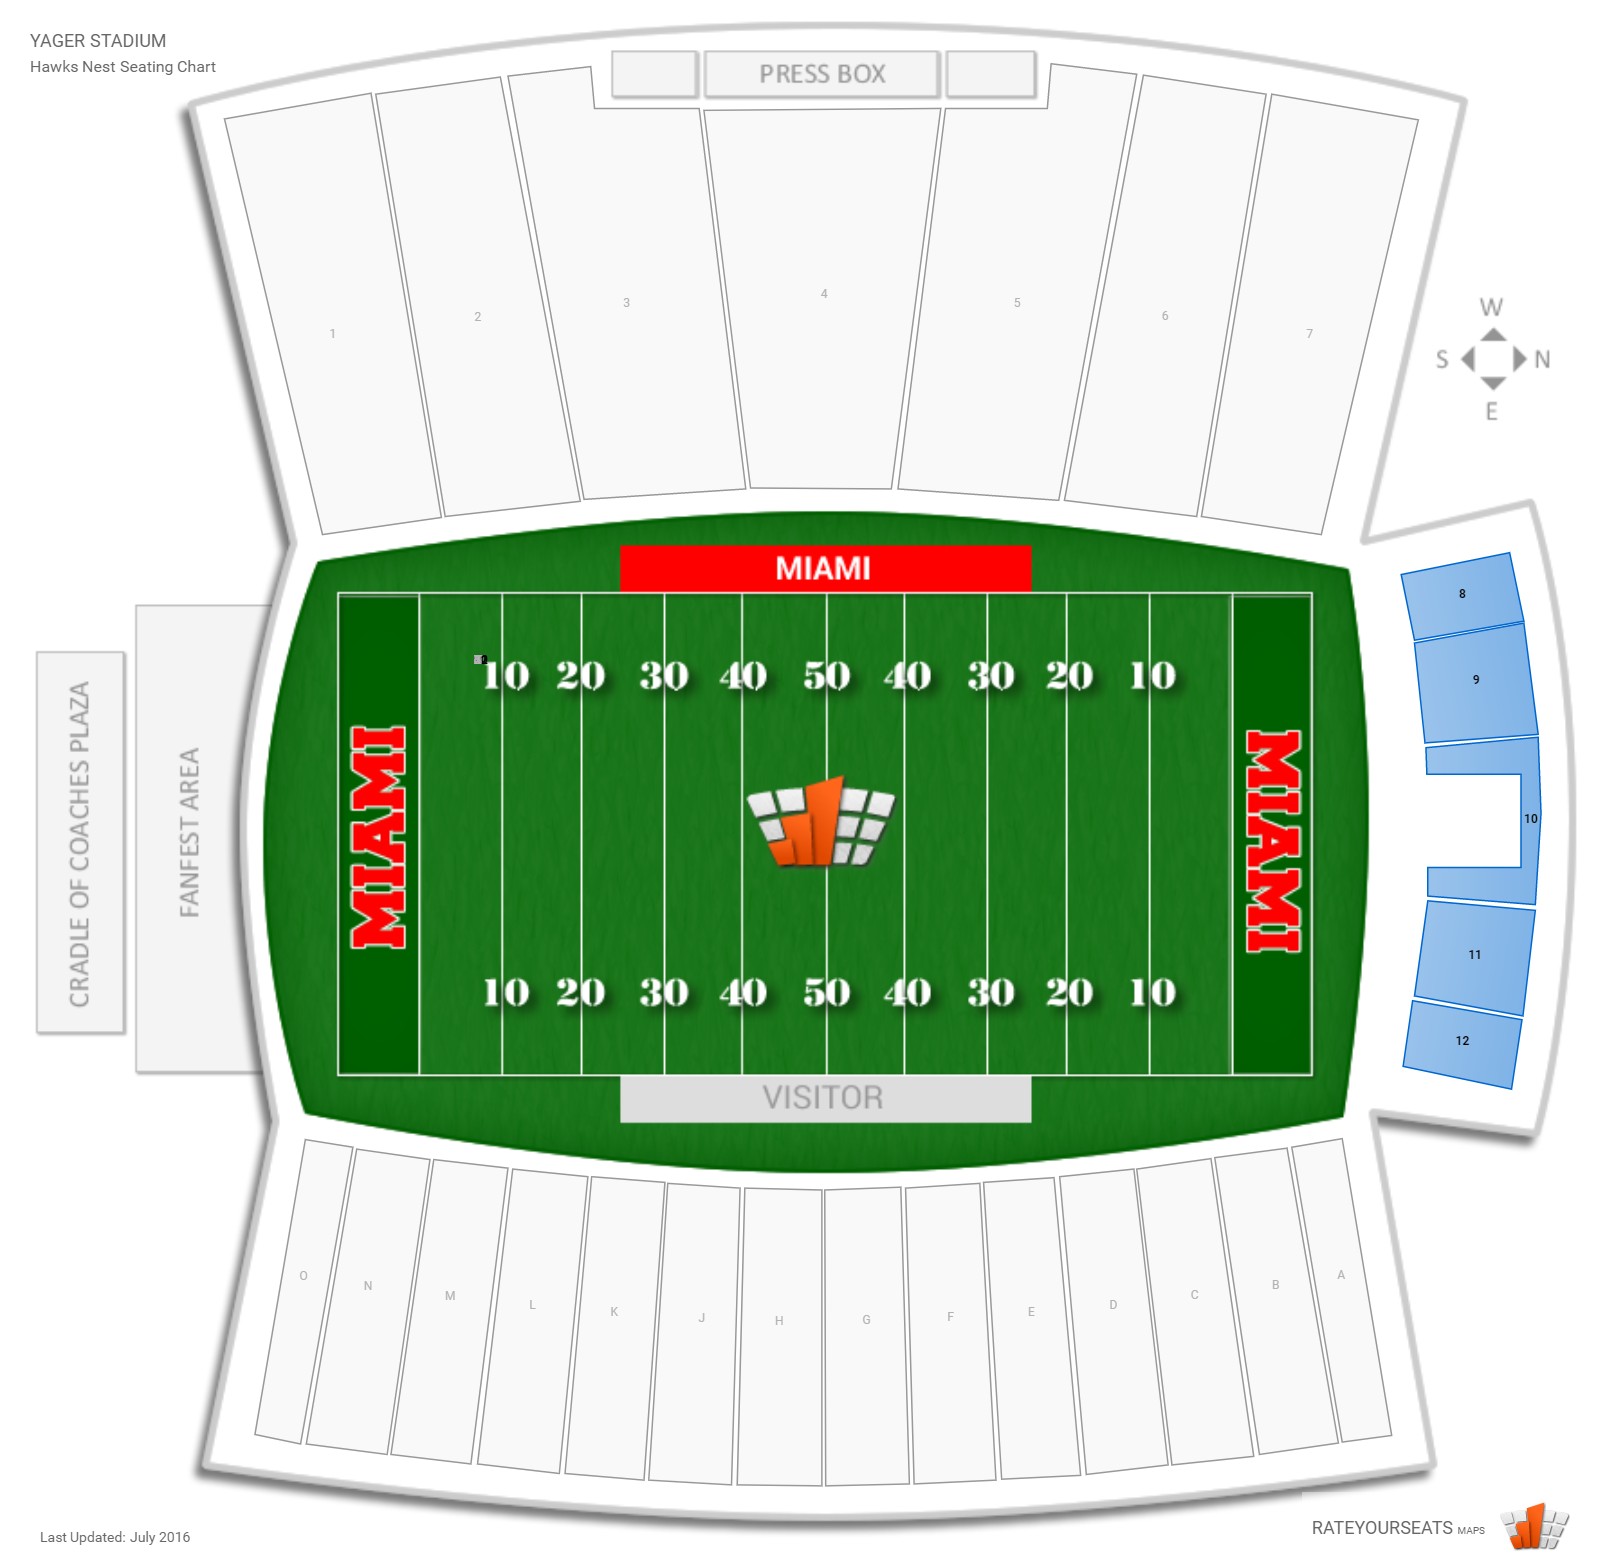 yager stadium (miami (oh)) seating guide - rateyourseats